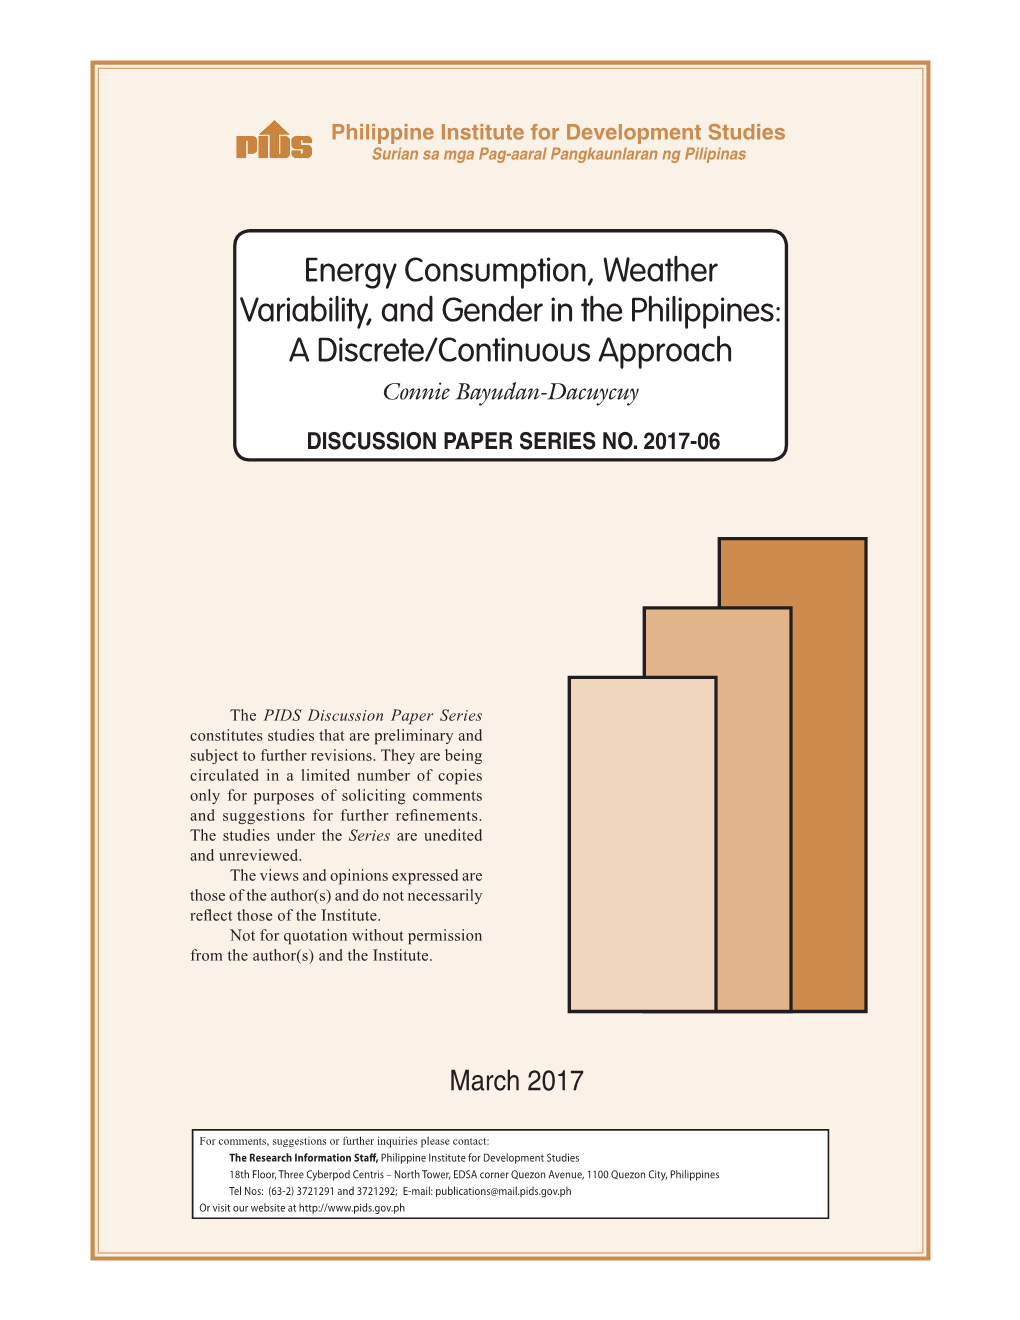 Energy Consumption, Weather Variability, and Gender in the Philippines: a Discrete/Continuous Approach Connie Bayudan-Dacuycuy